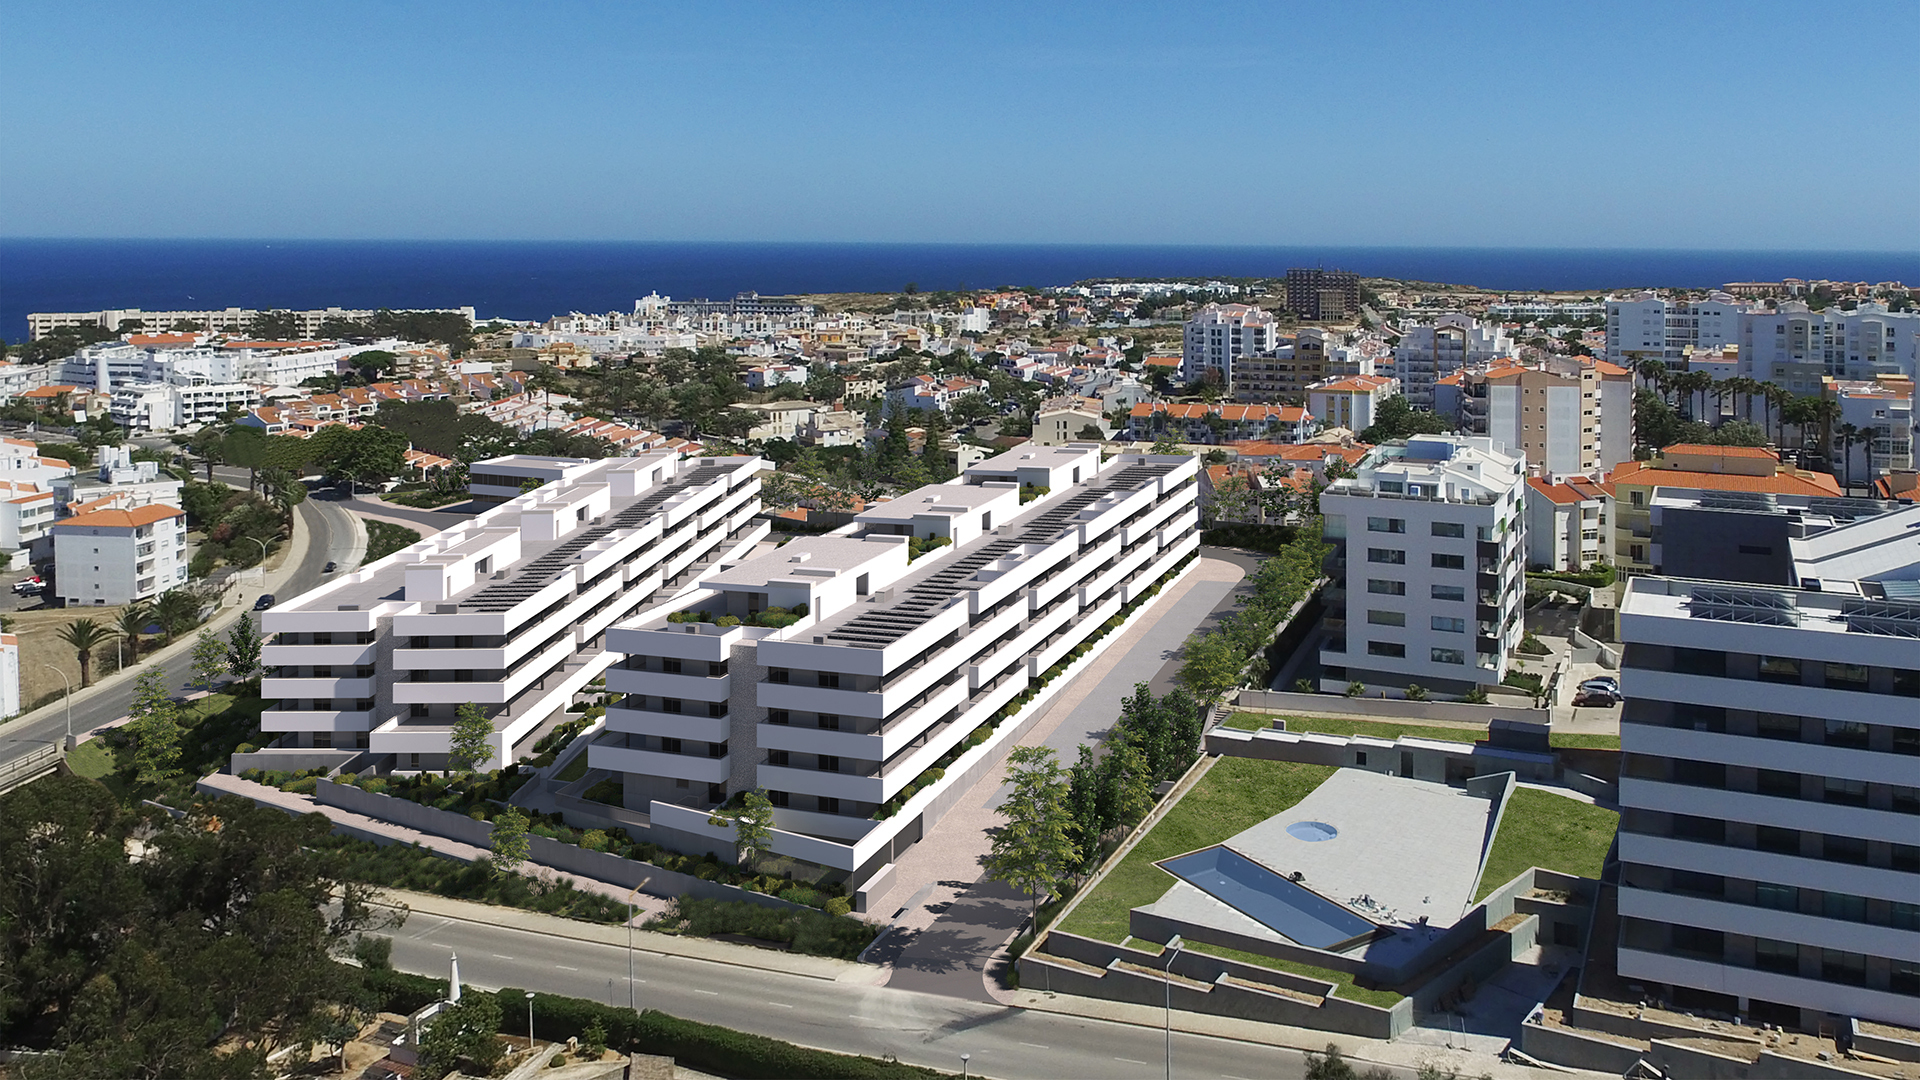 Luxury 2 Bedroom Apartments with Communal Pool, Spa and Sea Views, Lagos, West Algarve  | LG1853 Fantastic luxury apartments under construction, with sea views, only a few minutes walk away from the historic town centre of Lagos, with its marina, beautiful beaches, and golf courses. Owners will have access to a communal pool and spa area. 